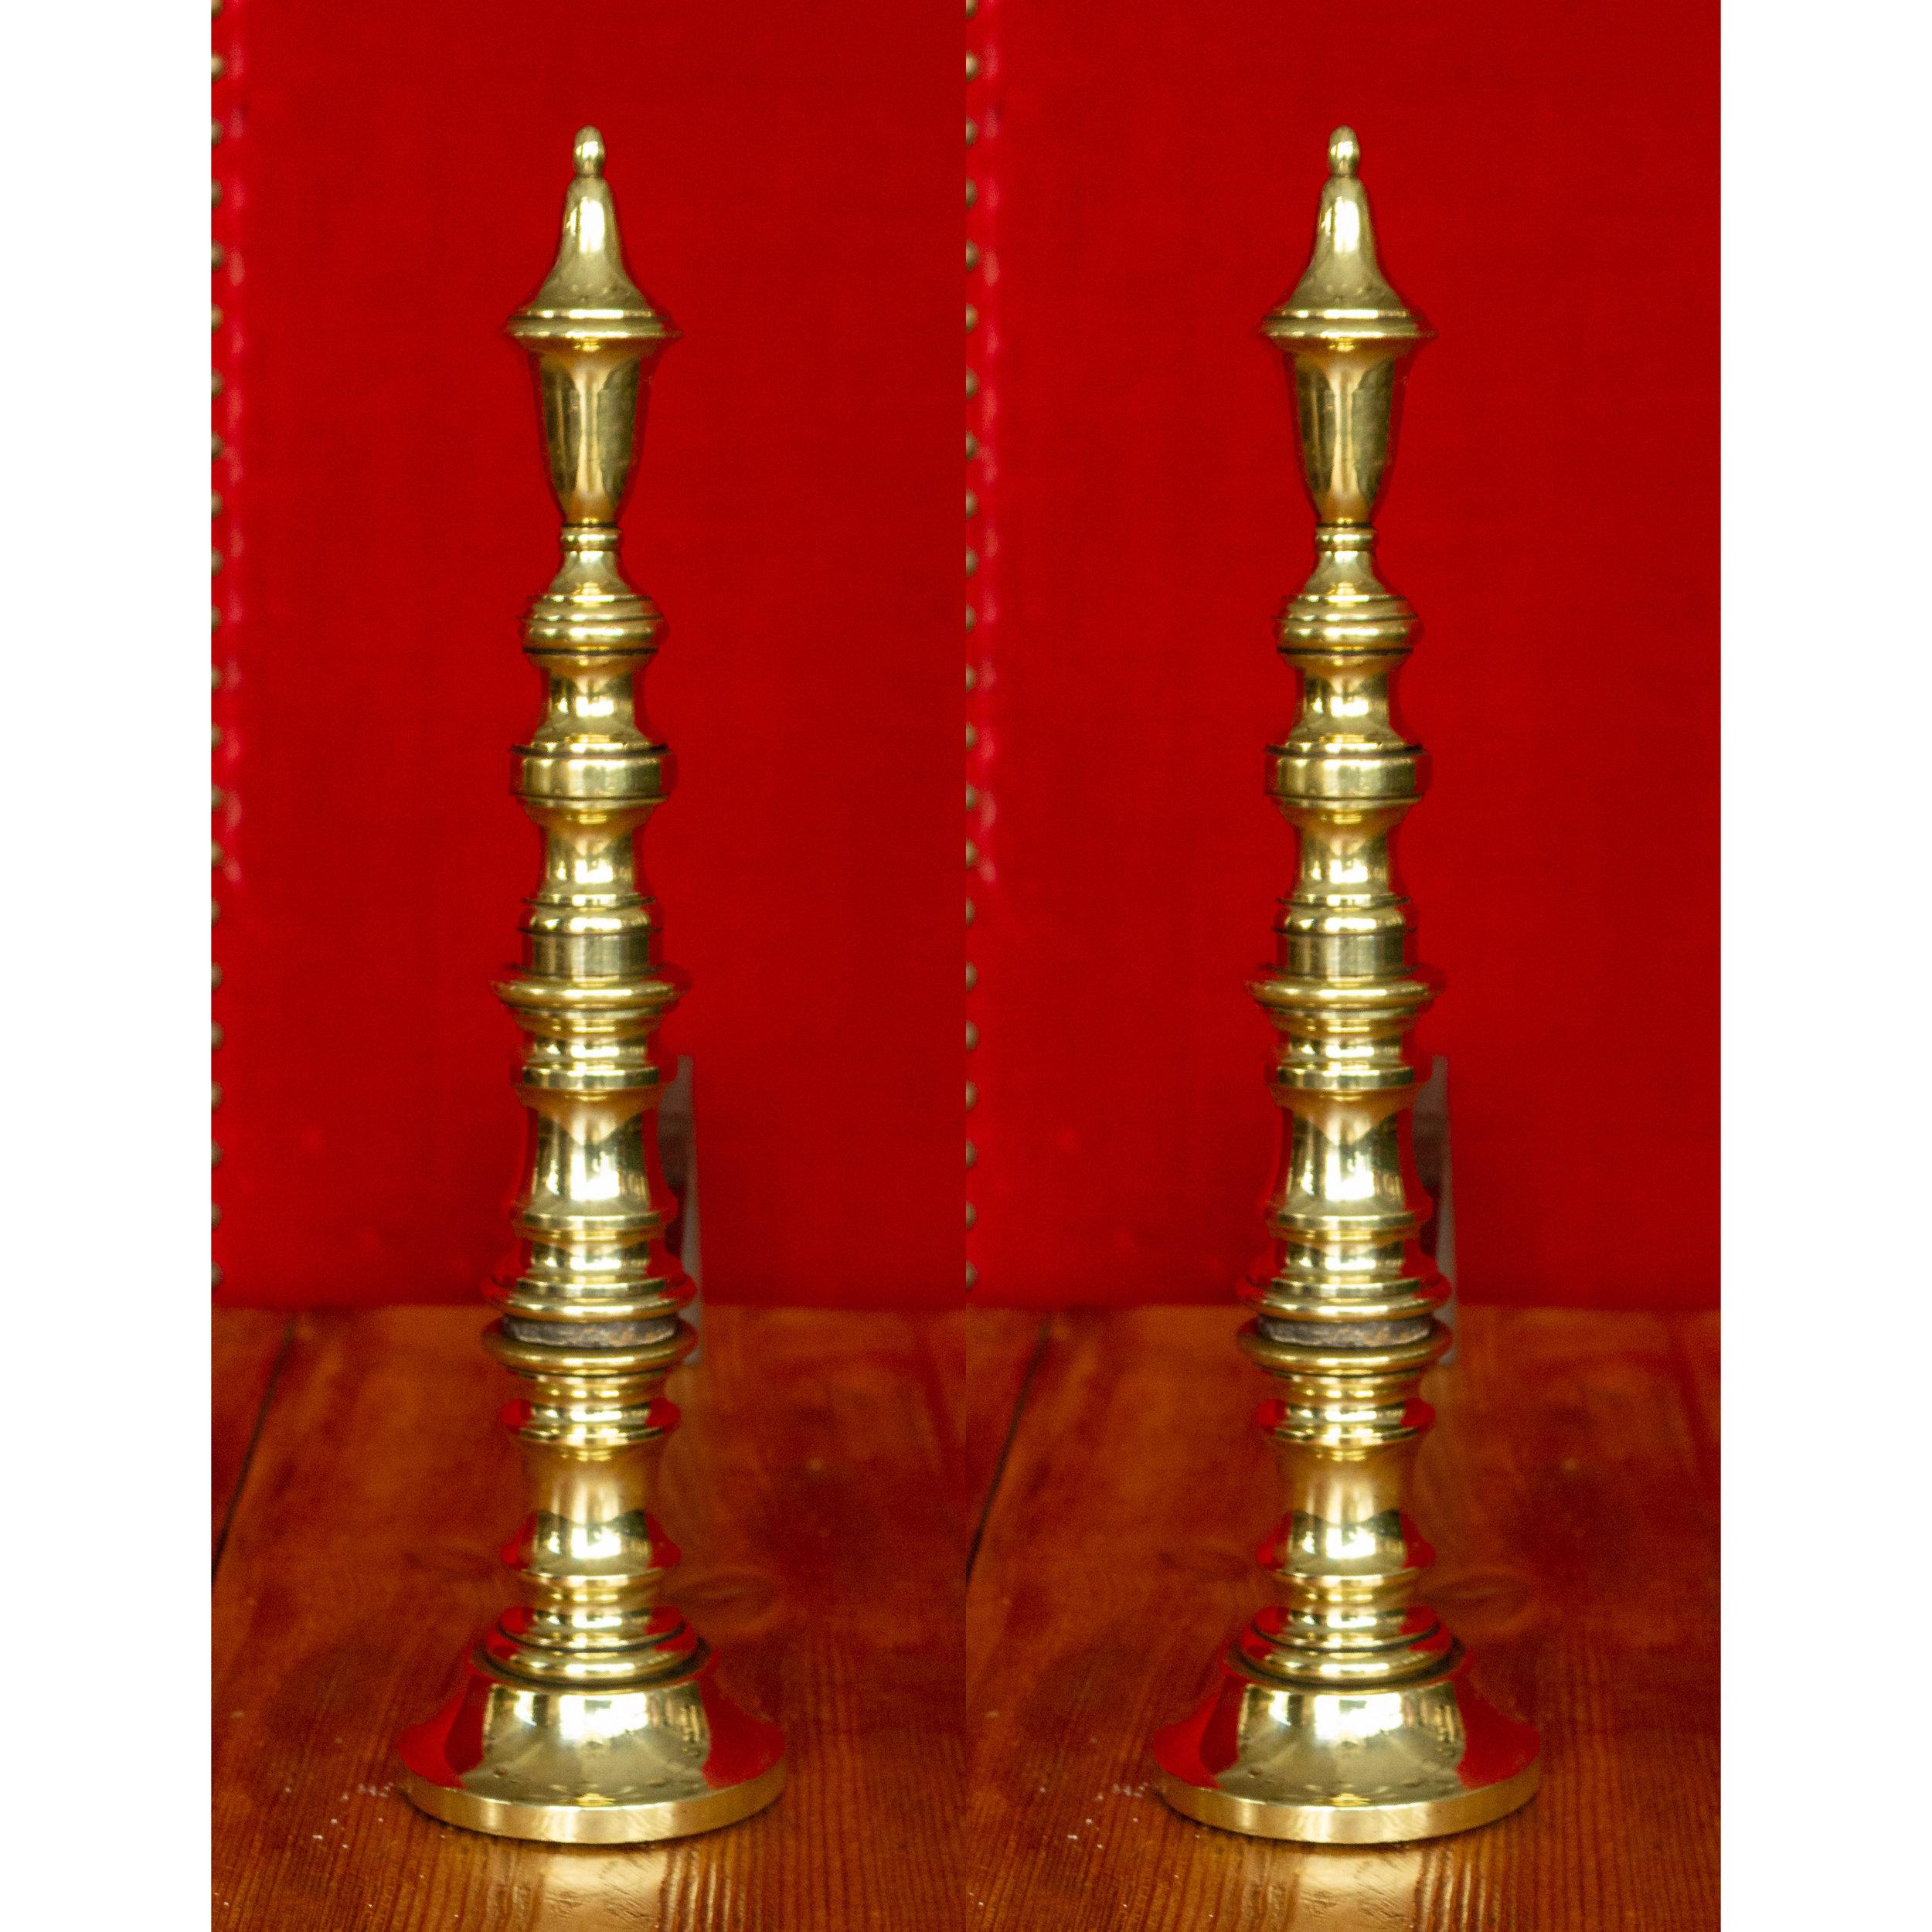 This pair of ornate French brass andirons, circa 1910, are comprised of elegantly stacked turned components. With dimensions of 15 inches high, 3.5 inches wide and 16 inches deep, they are well suited for a variety of fireplaces and their good